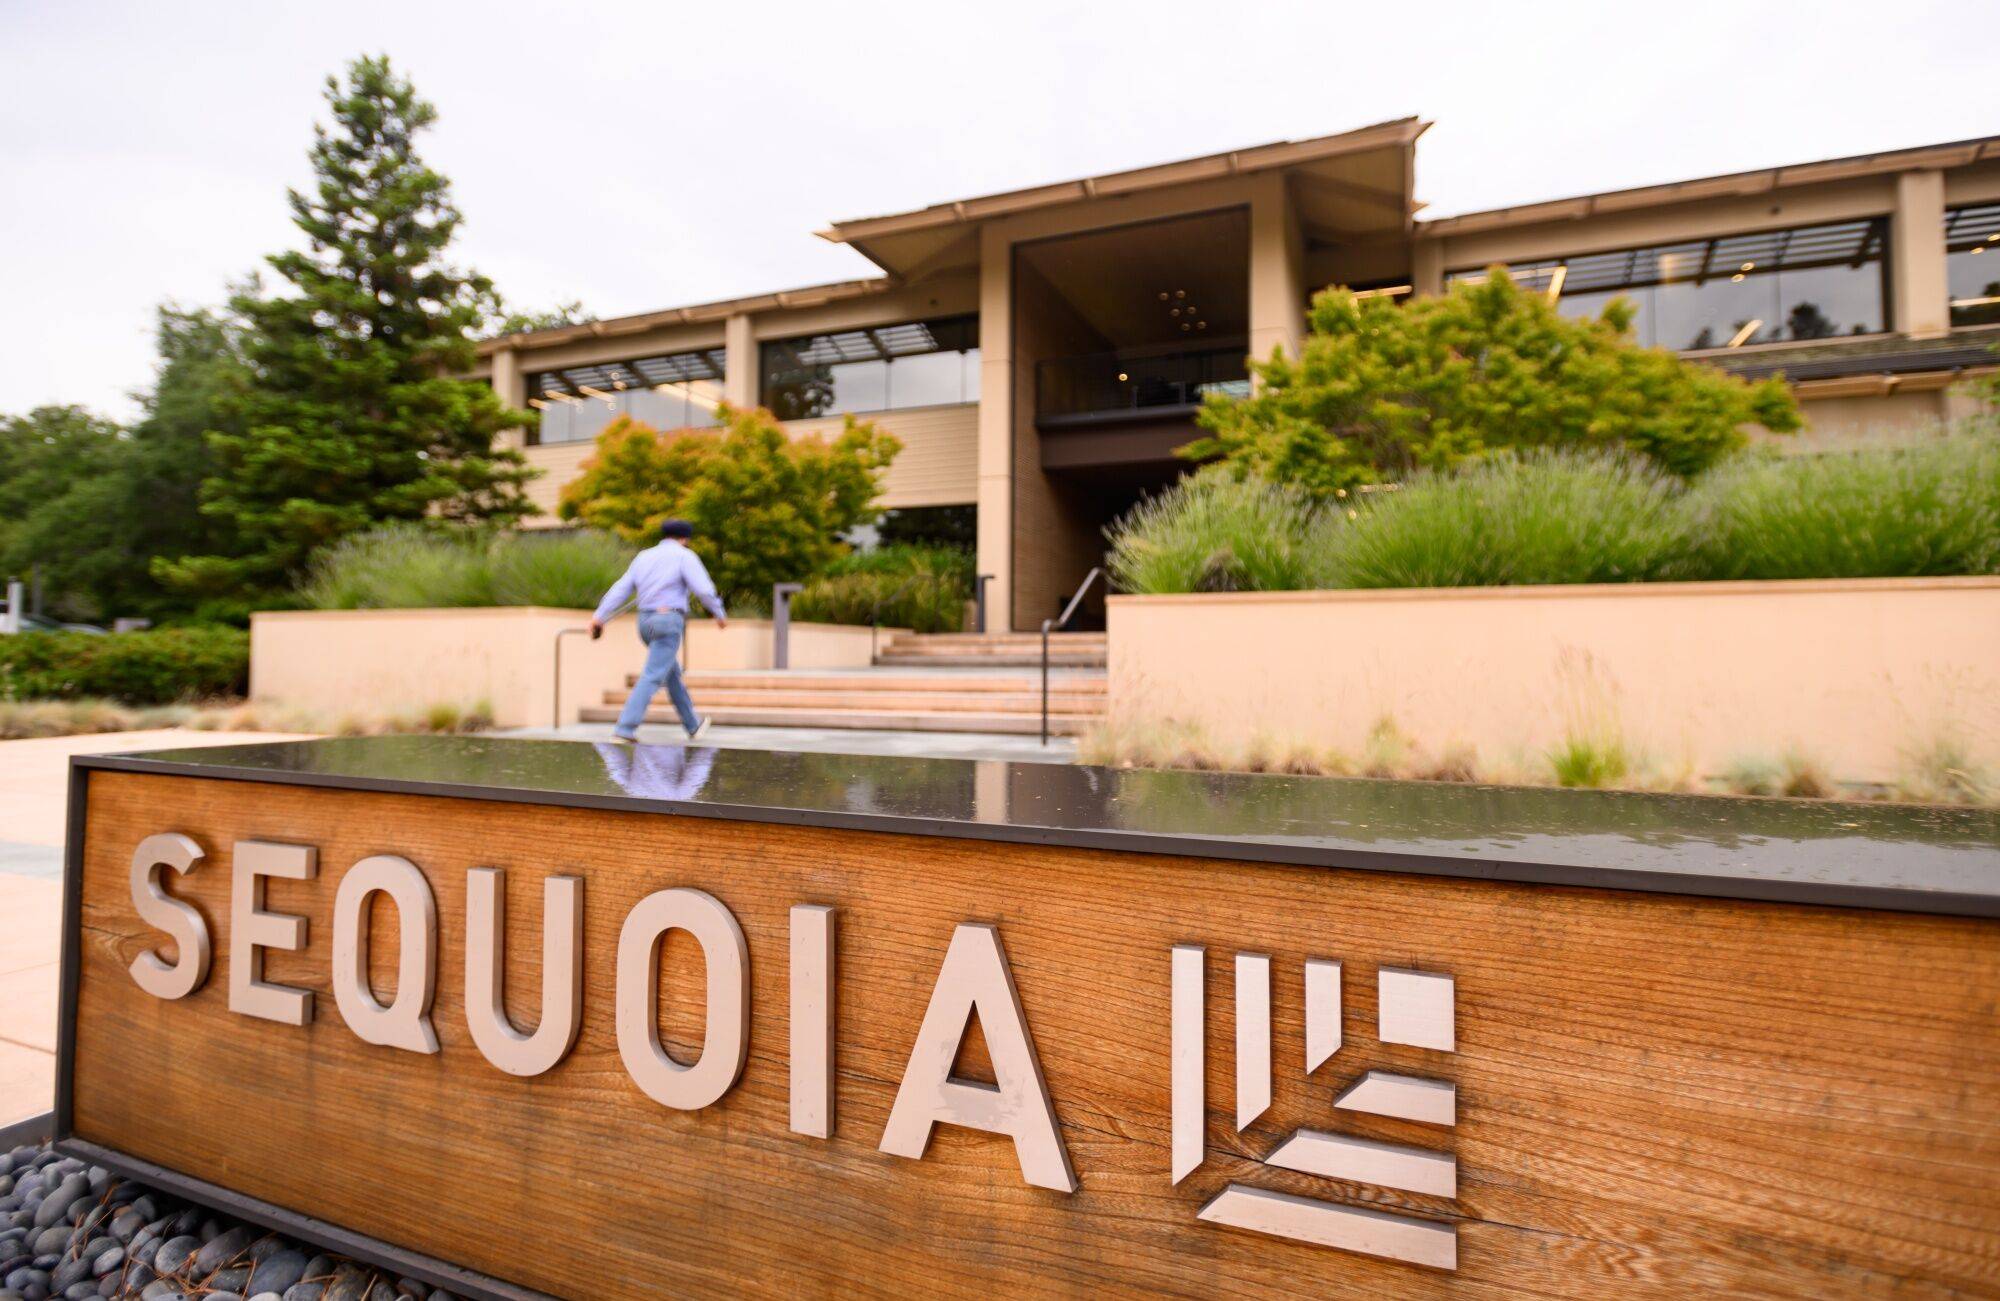 Sequoia Capital Faces Congressional Scrutiny Over China Investments